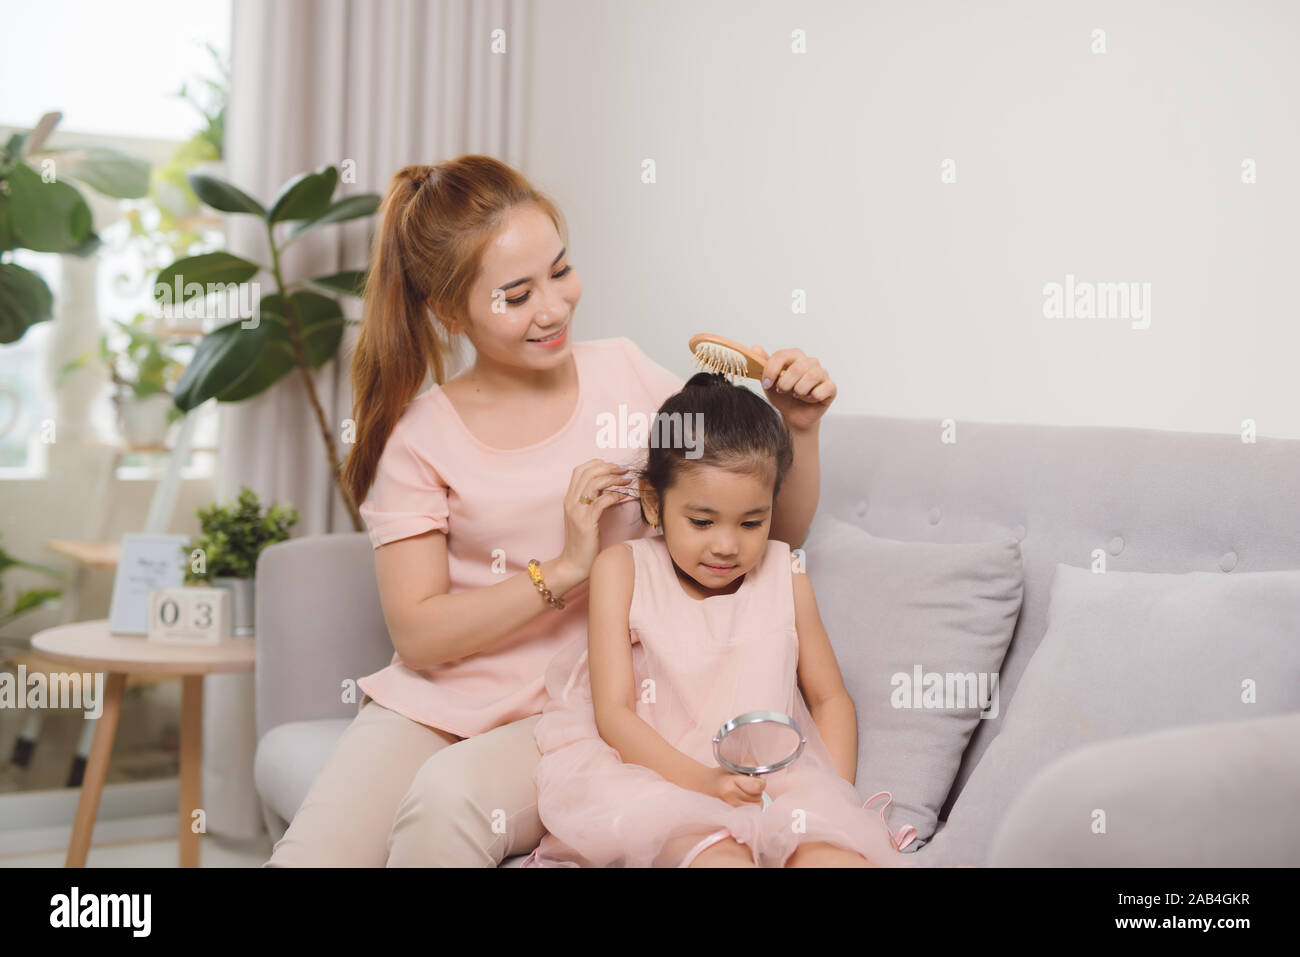 A young mother combing a hair little girl Stock Photo